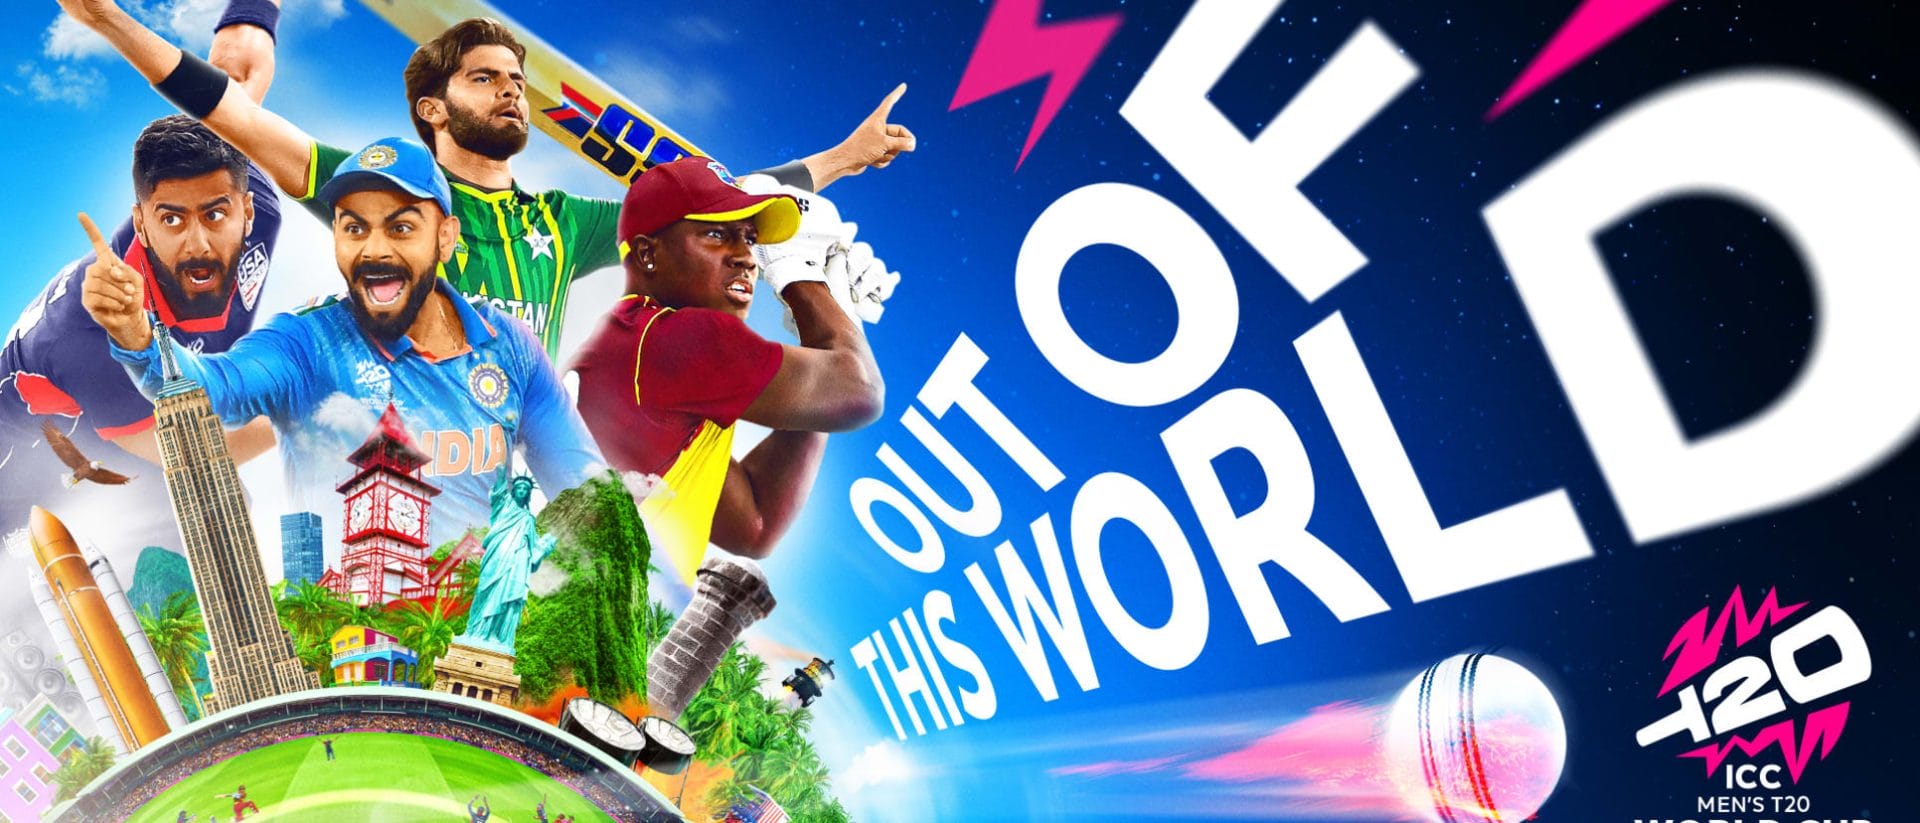 ICC Men's T20 World Cup promotional poster with players.